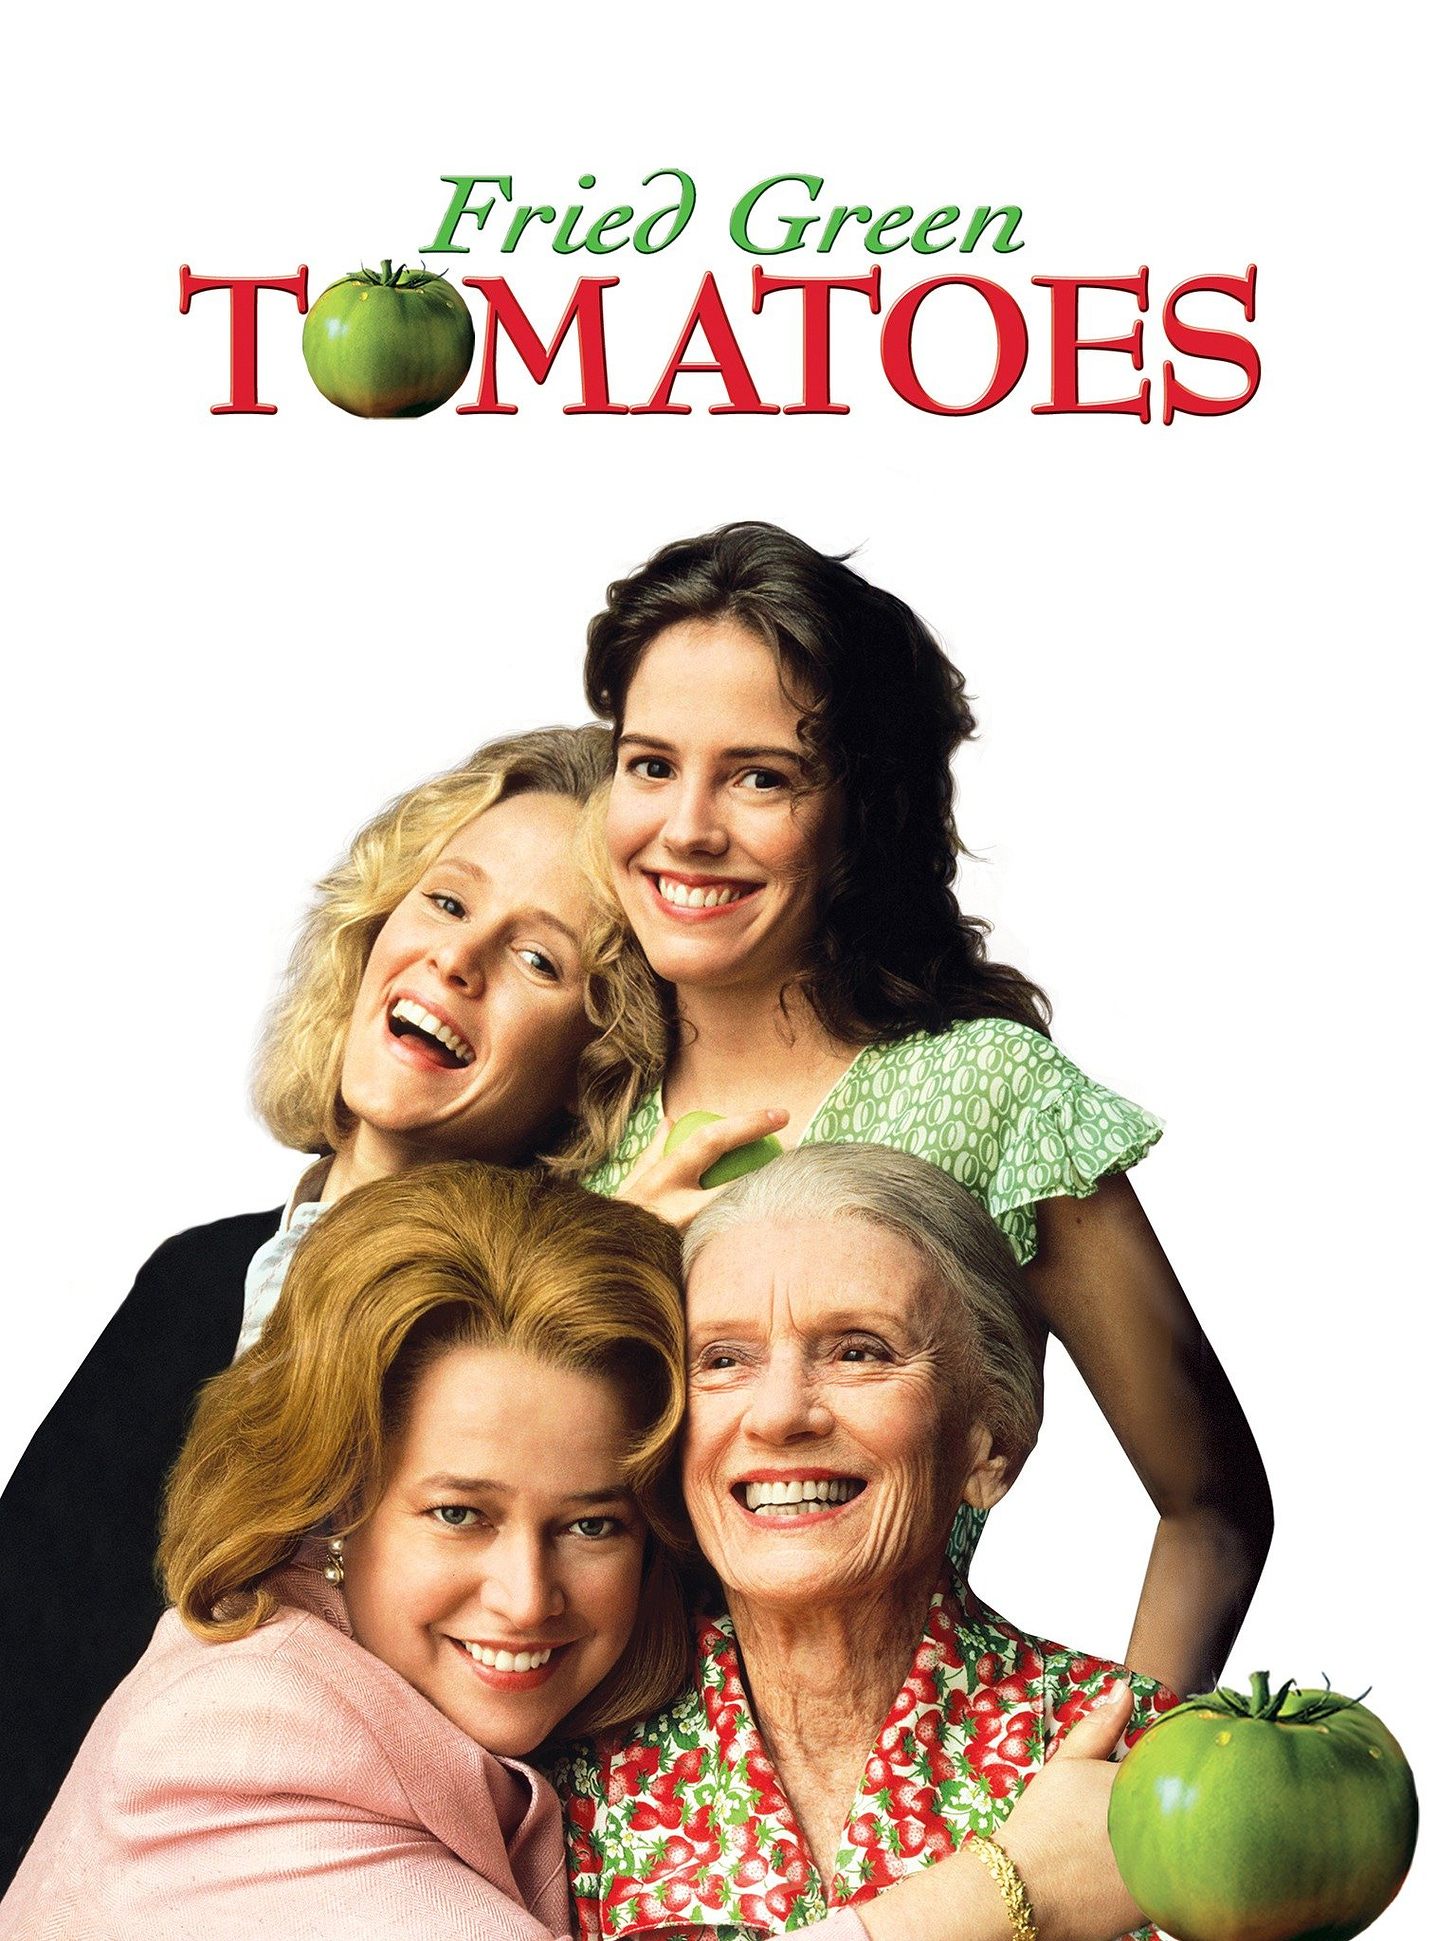 Fried Green Tomatoes - Rotten Tomatoes